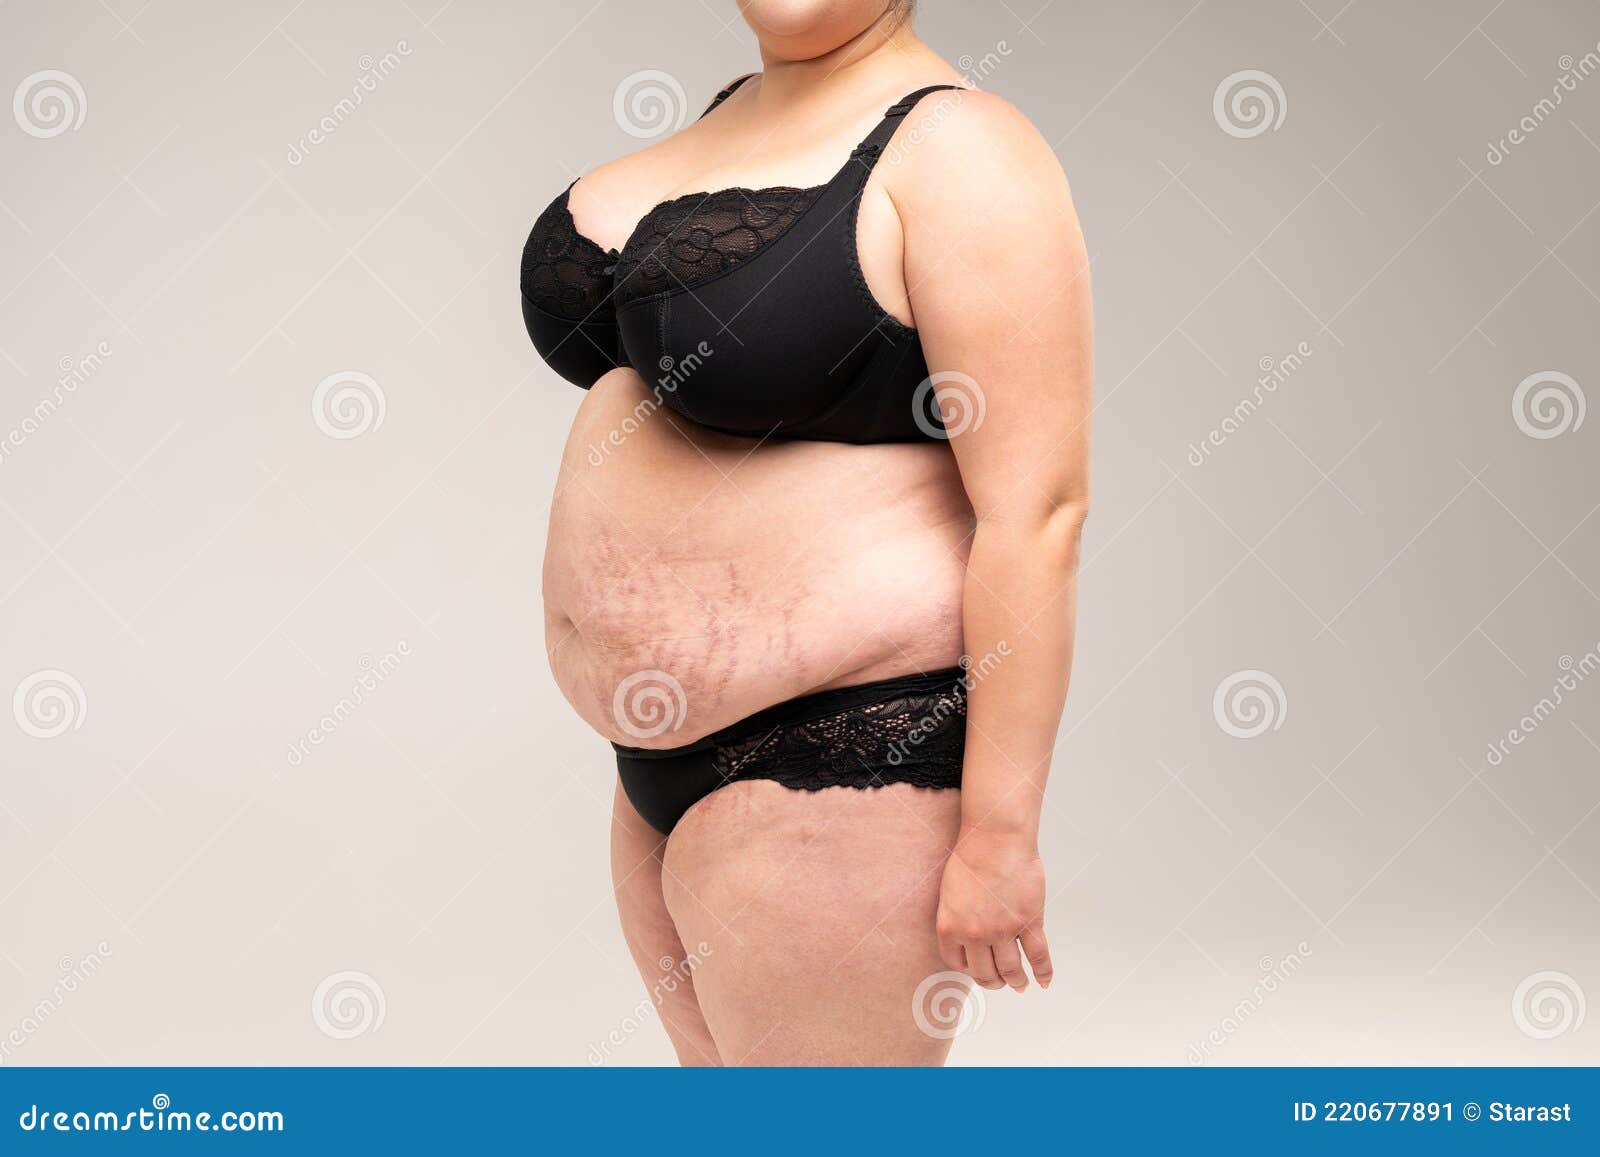 Morbidly obese people in lingerie 304 Obese Woman Lingerie Photos Free Royalty Free Stock Photos From Dreamstime